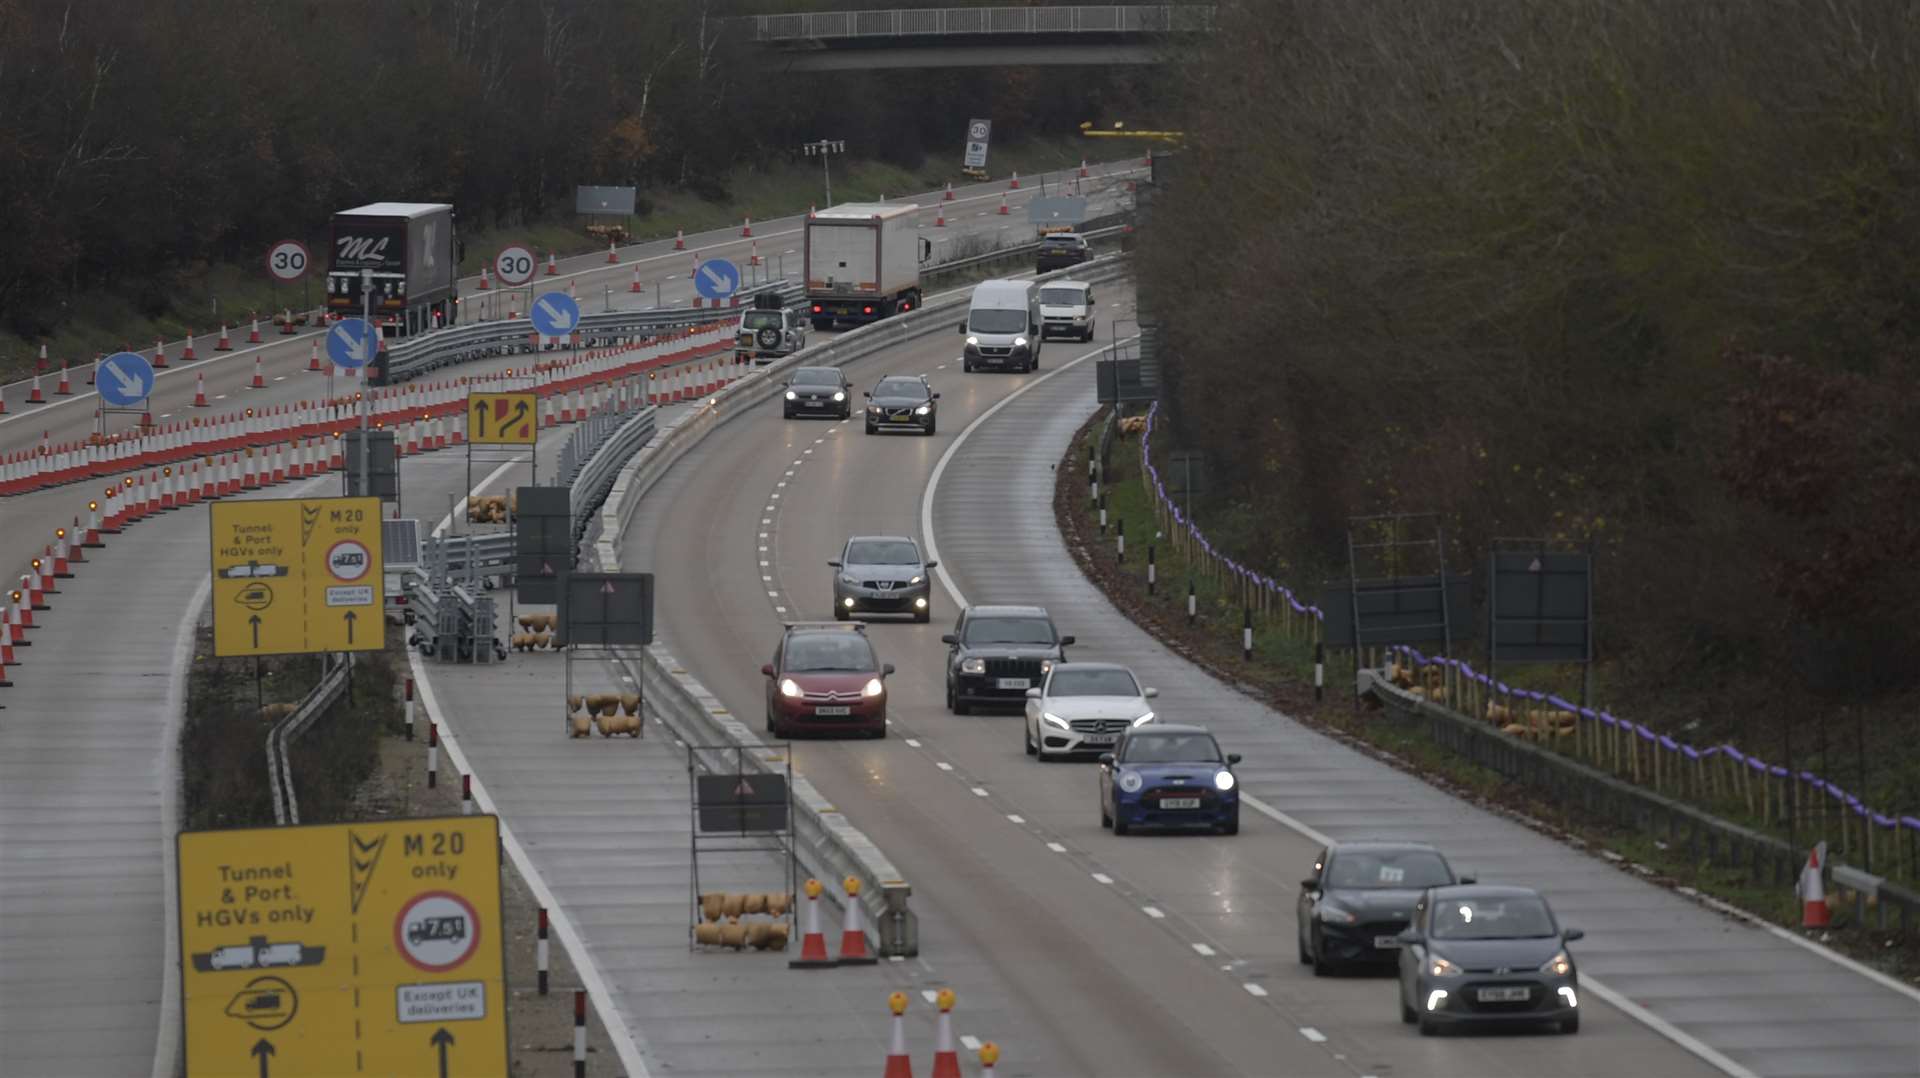 The traffic management plan will be deployed between Maidstone and Ashford